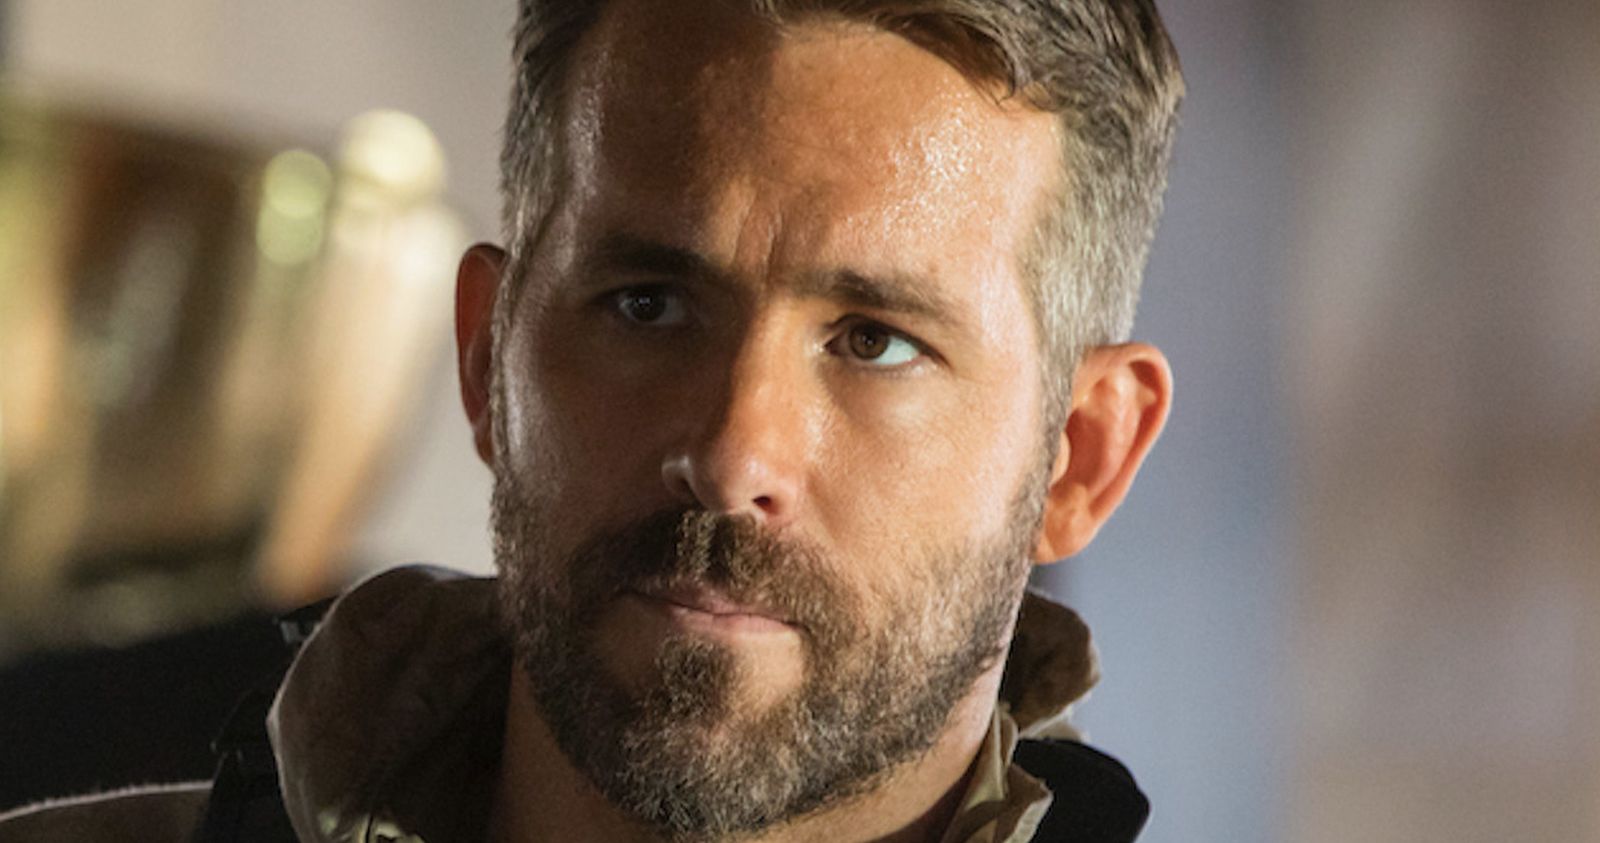 Ryan Reynolds Steps Back from Filmmaking to Spend More Time with Family